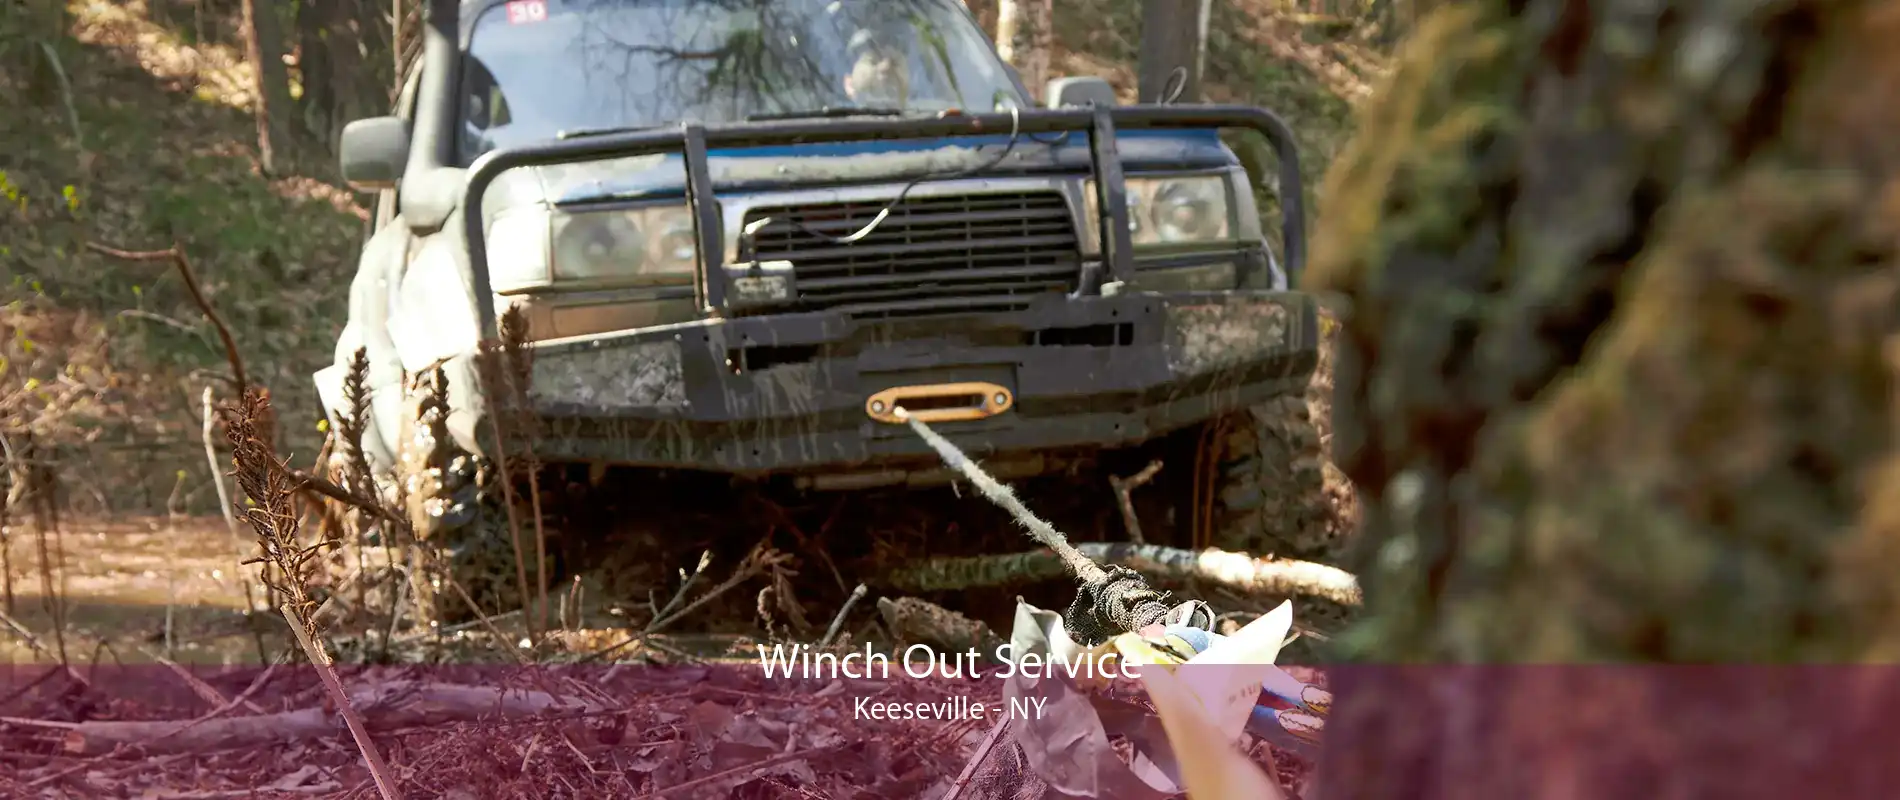 Winch Out Service Keeseville - NY